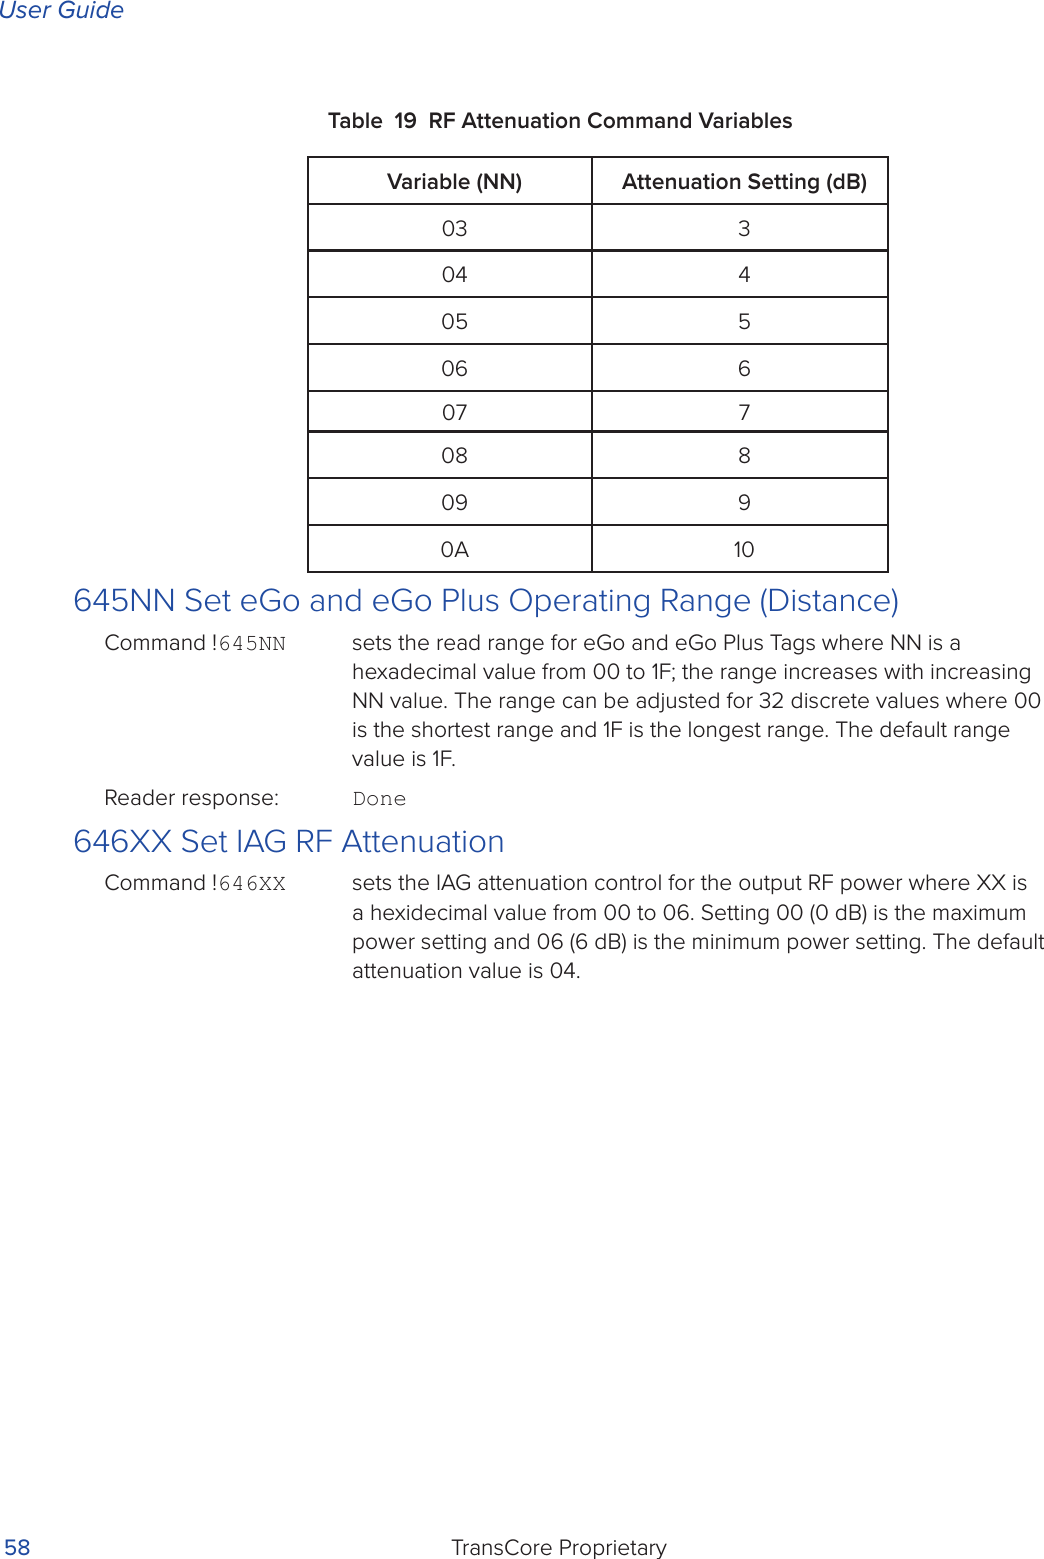 User GuideTransCore Proprietary 58Table 19 RF Attenuation Command VariablesVariable (NN) Attenuation Setting (dB)03 304 405 506 607 708 809 90A 10645NN Set eGo and eGo Plus Operating Range (Distance)Command !645NN  sets the read range for eGo and eGo Plus Tags where NN is a hexadecimal value from 00 to 1F; the range increases with increasing NN value. The range can be adjusted for 32 discrete values where 00 is the shortest range and 1F is the longest range. The default range value is 1F. Reader response:  Done646XX Set IAG RF AttenuationCommand !646XX   sets the IAG attenuation control for the output RF power where XX is a hexidecimal value from 00 to 06. Setting 00 (0 dB) is the maximum power setting and 06 (6 dB) is the minimum power setting. The default attenuation value is 04.